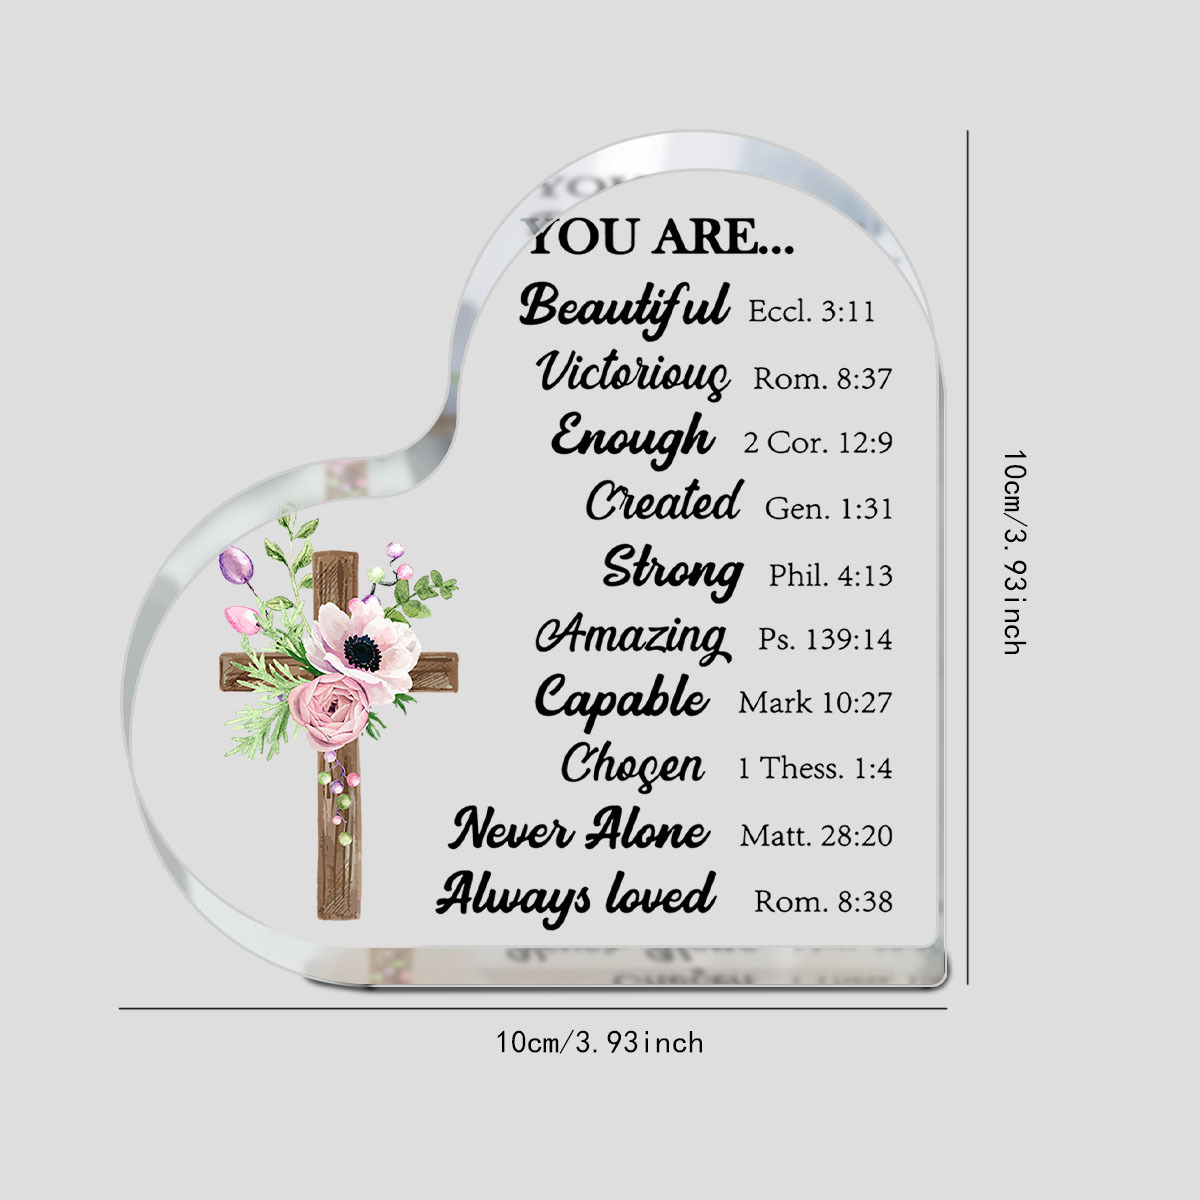 Acrylic Christian Gifts for Women Inspirational Gifts with Bible